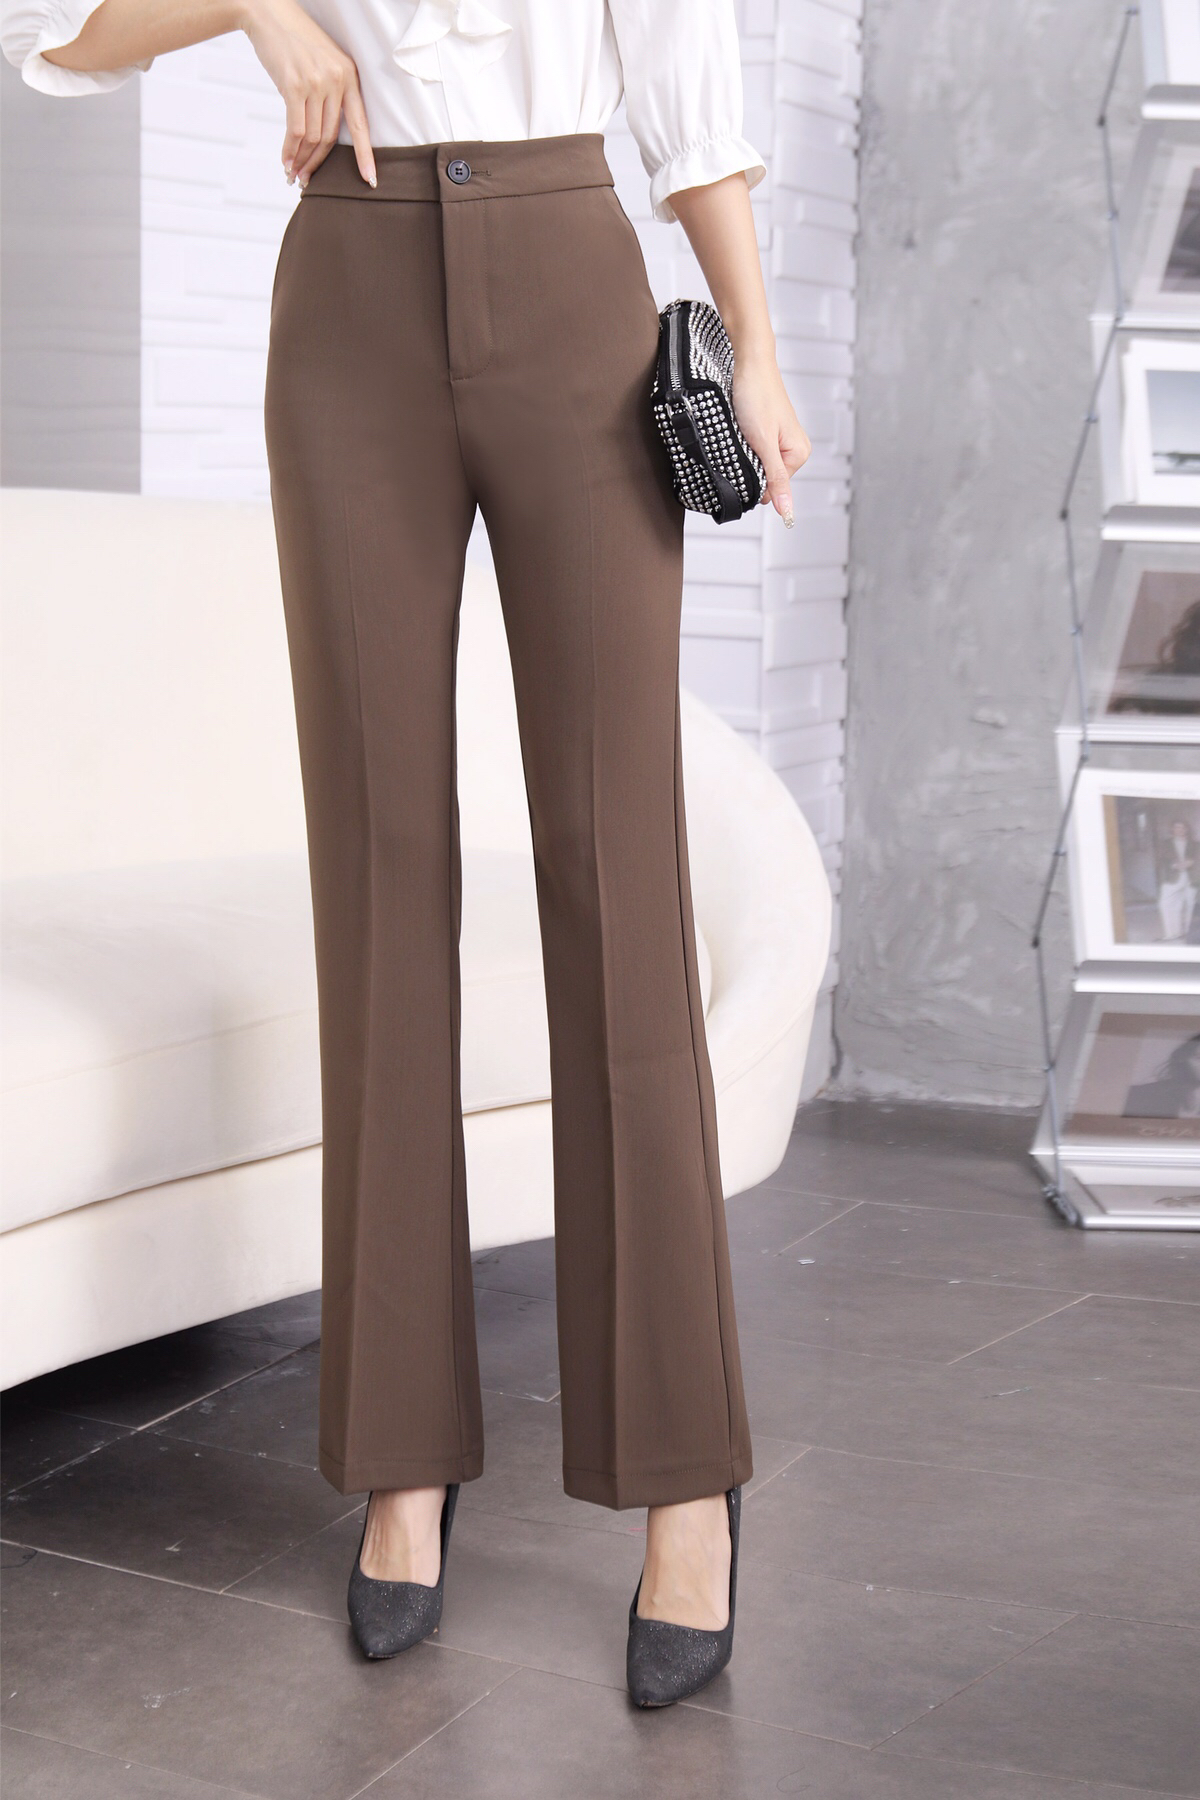 Professional Business Formal Pants for Women Black Beige Color Clothes  Trousers Autumn Winter Office Work Pants Female 2021